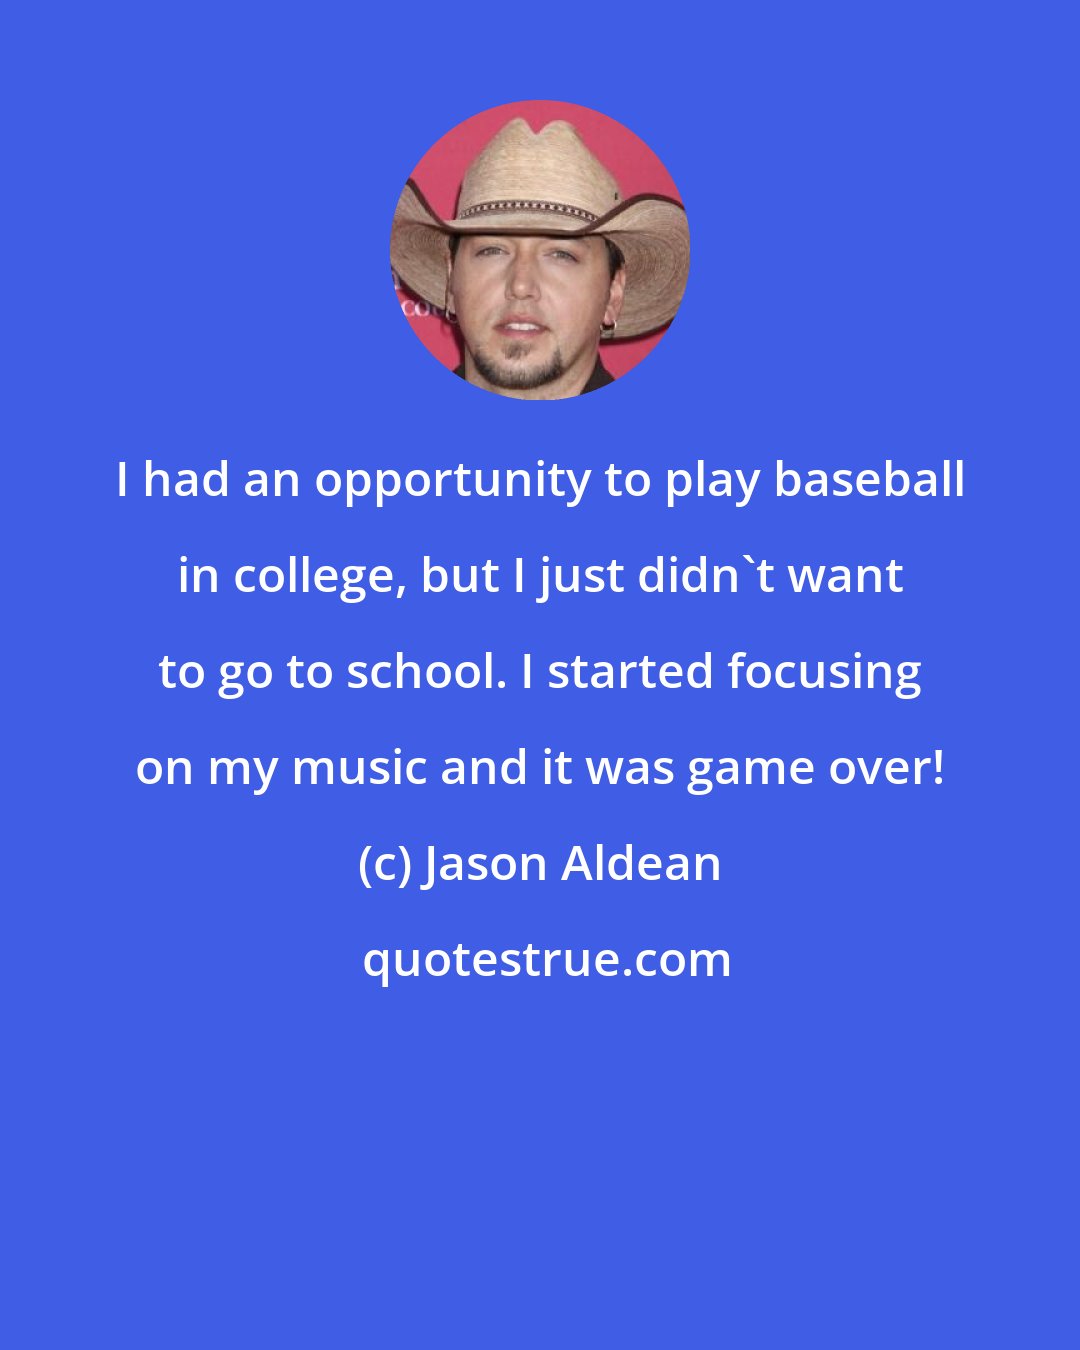 Jason Aldean: I had an opportunity to play baseball in college, but I just didn't want to go to school. I started focusing on my music and it was game over!